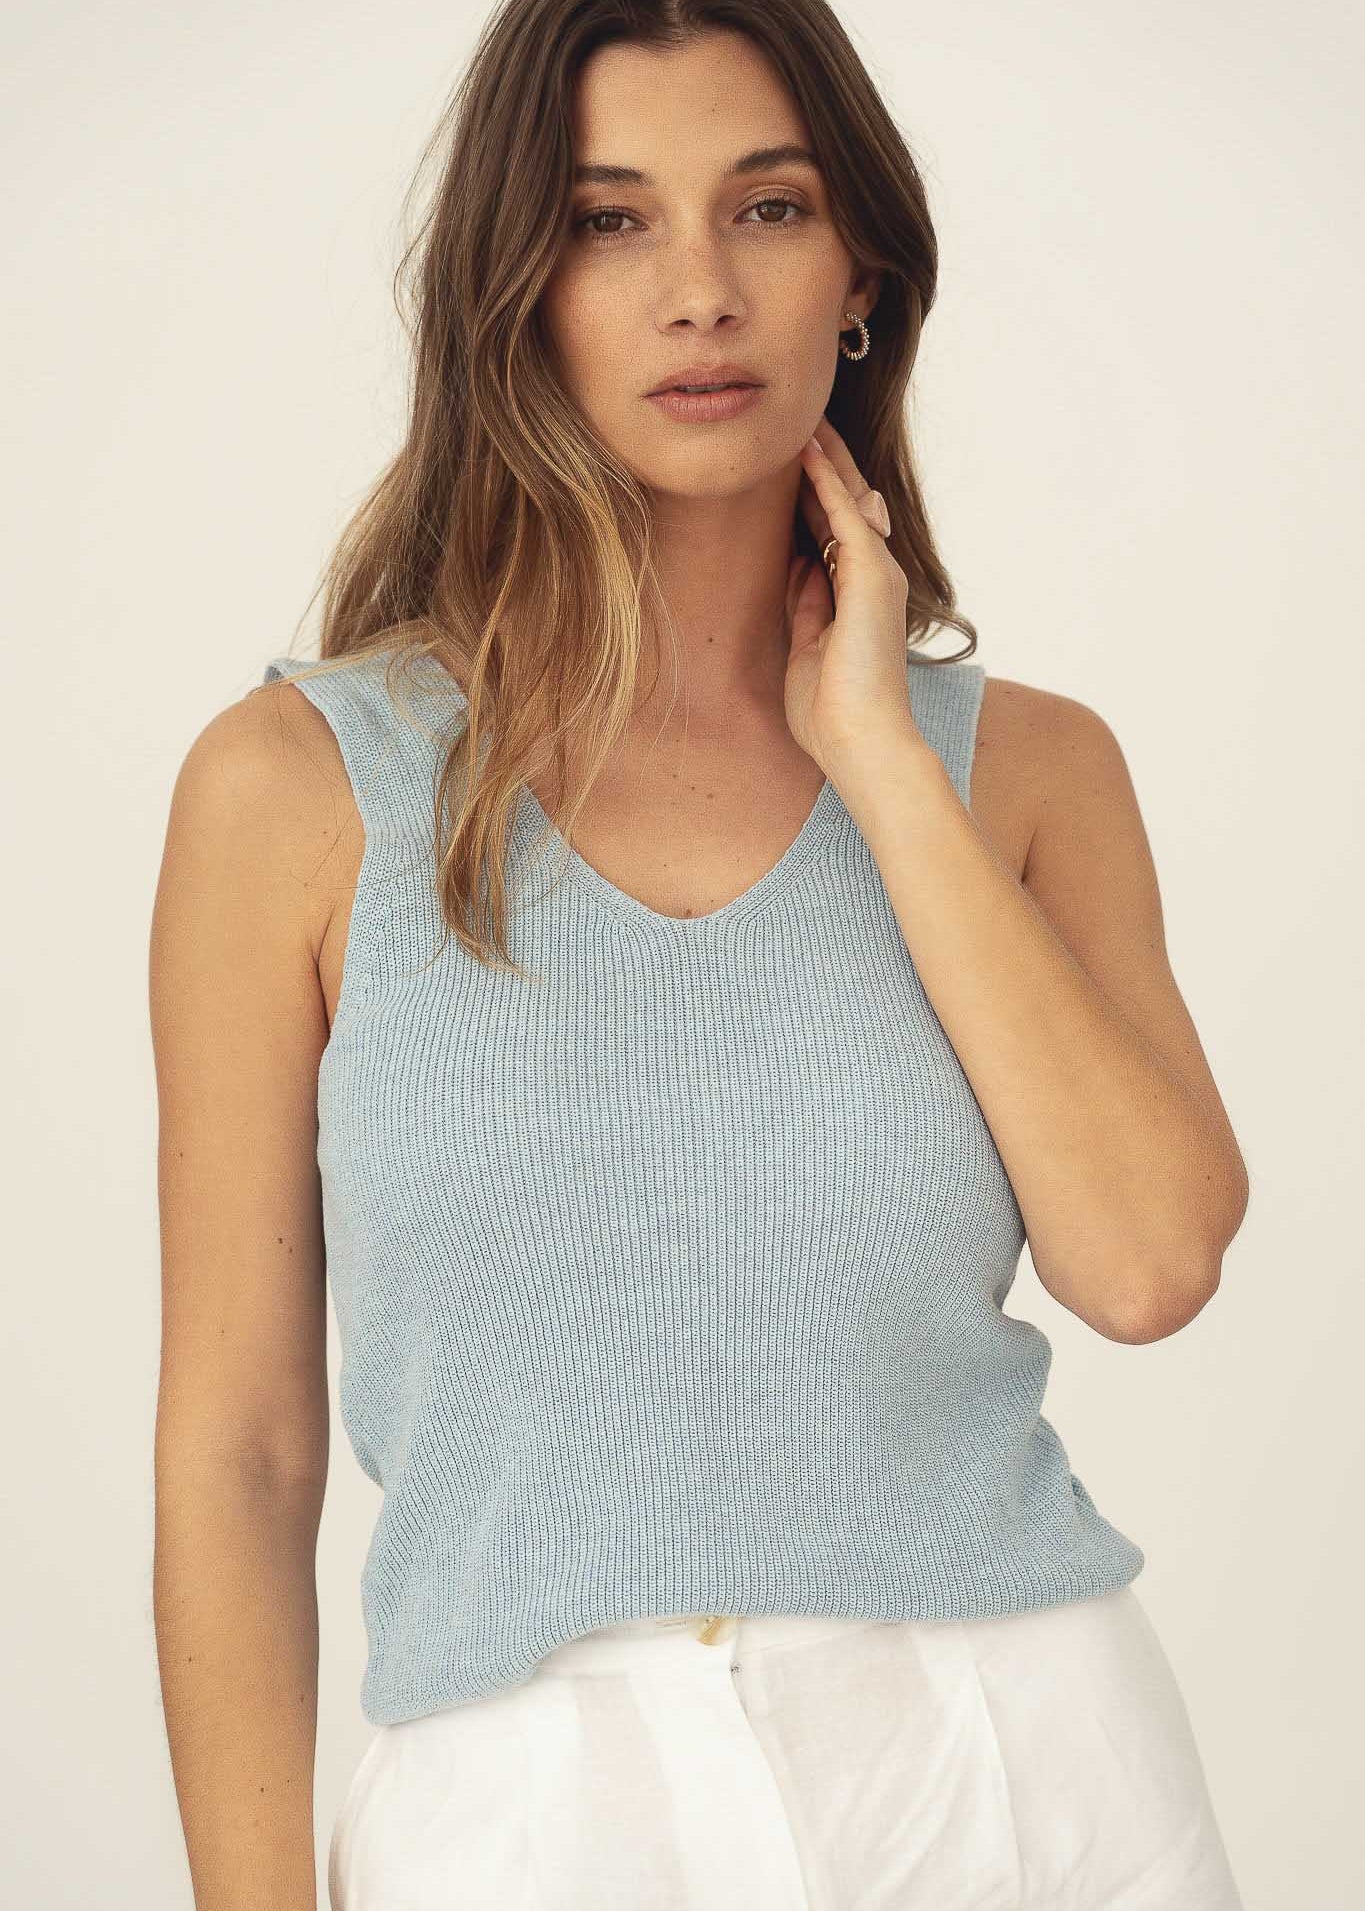 Naz women's cotton knit top for summer in light blue. Made form recycled fibers, in Portugal. 